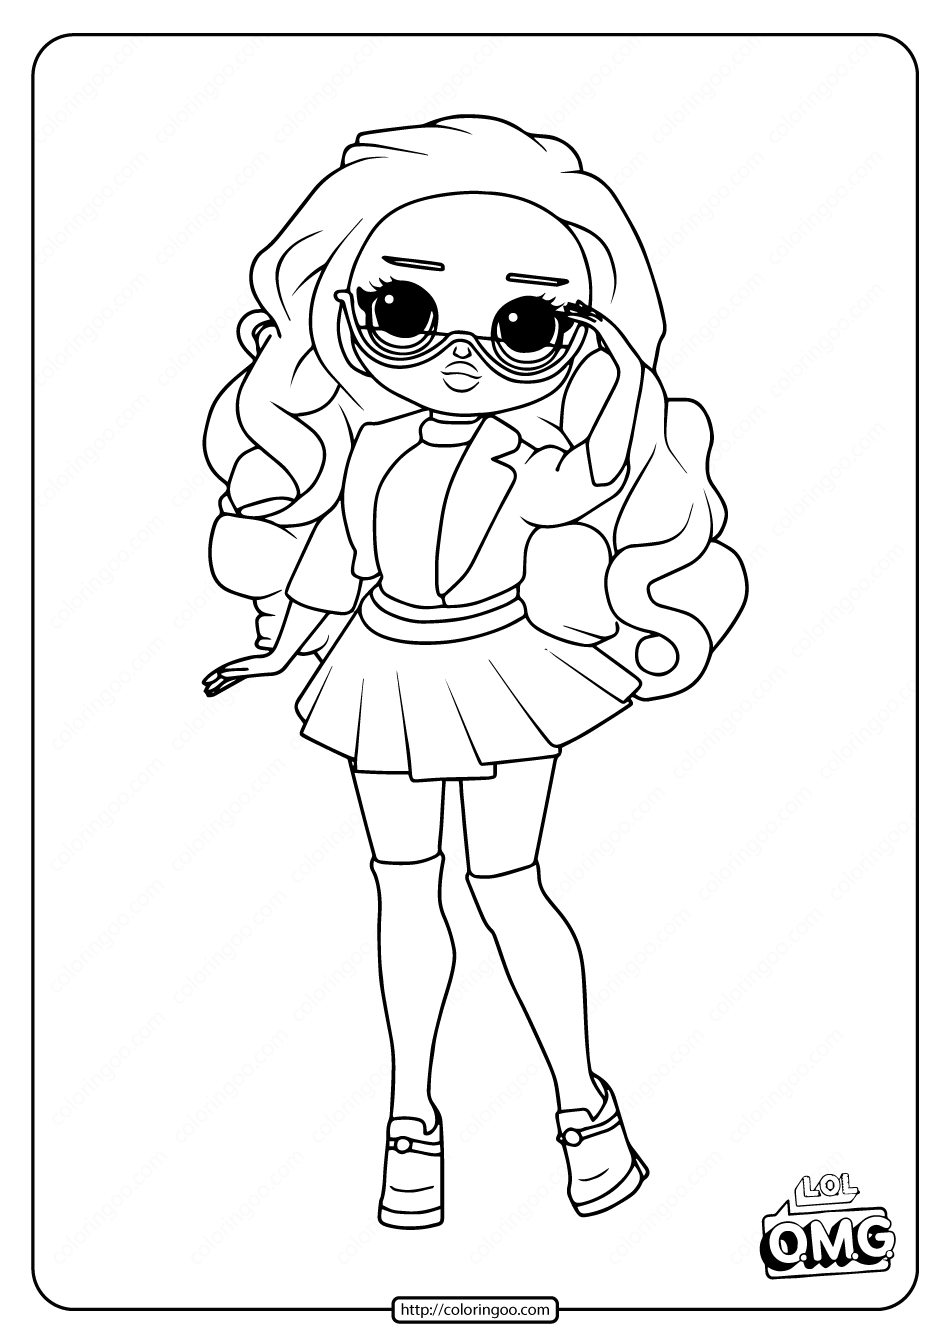 LOL Coloring Pages FREE Printable 29